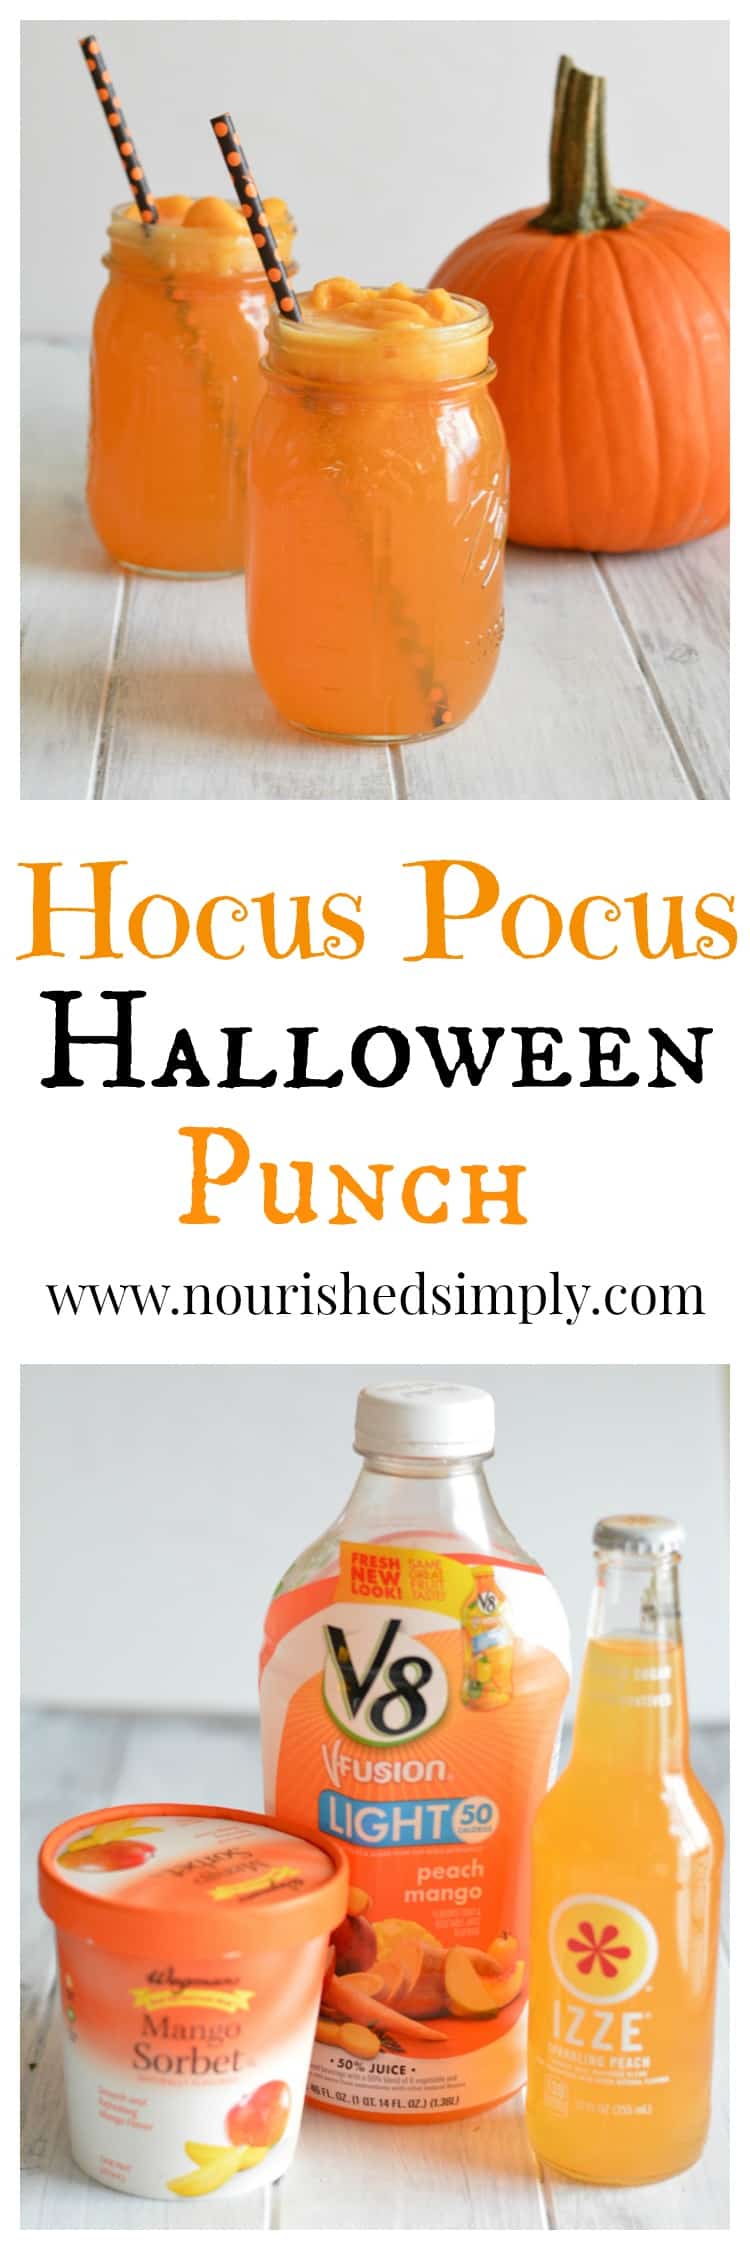 Add Hocus Pocus Halloween Punch to your Halloween Celebration. No artificial colors.